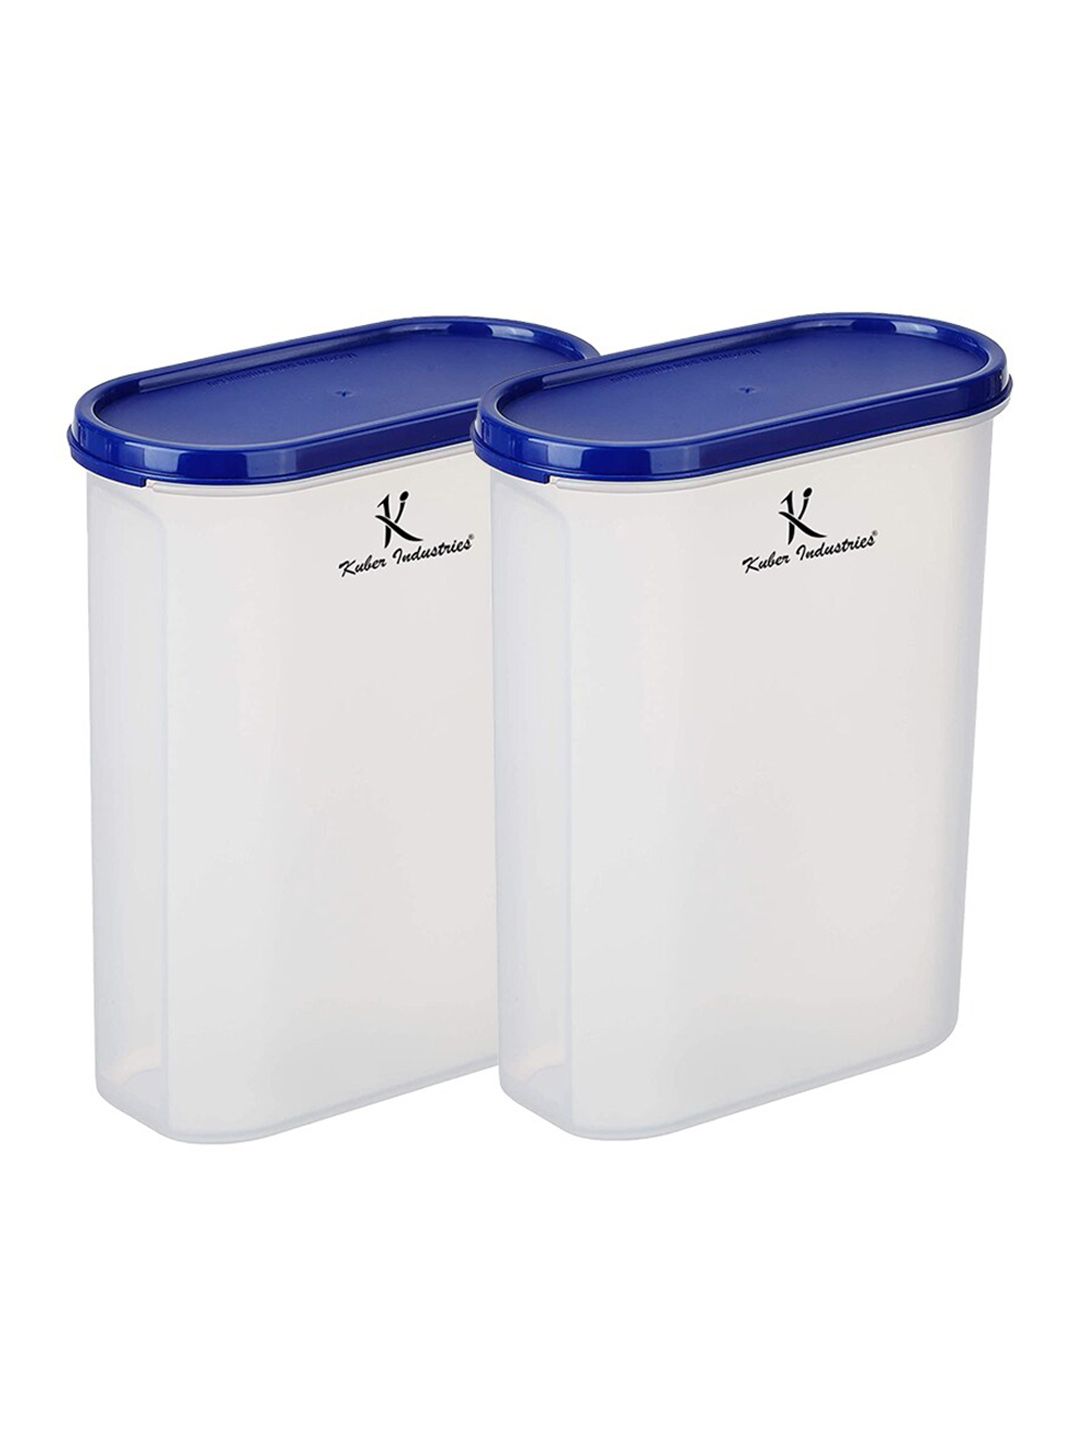 Kuber Industries Set of 2 Airtight Space Saver Modular Storage Jar Containers Price in India